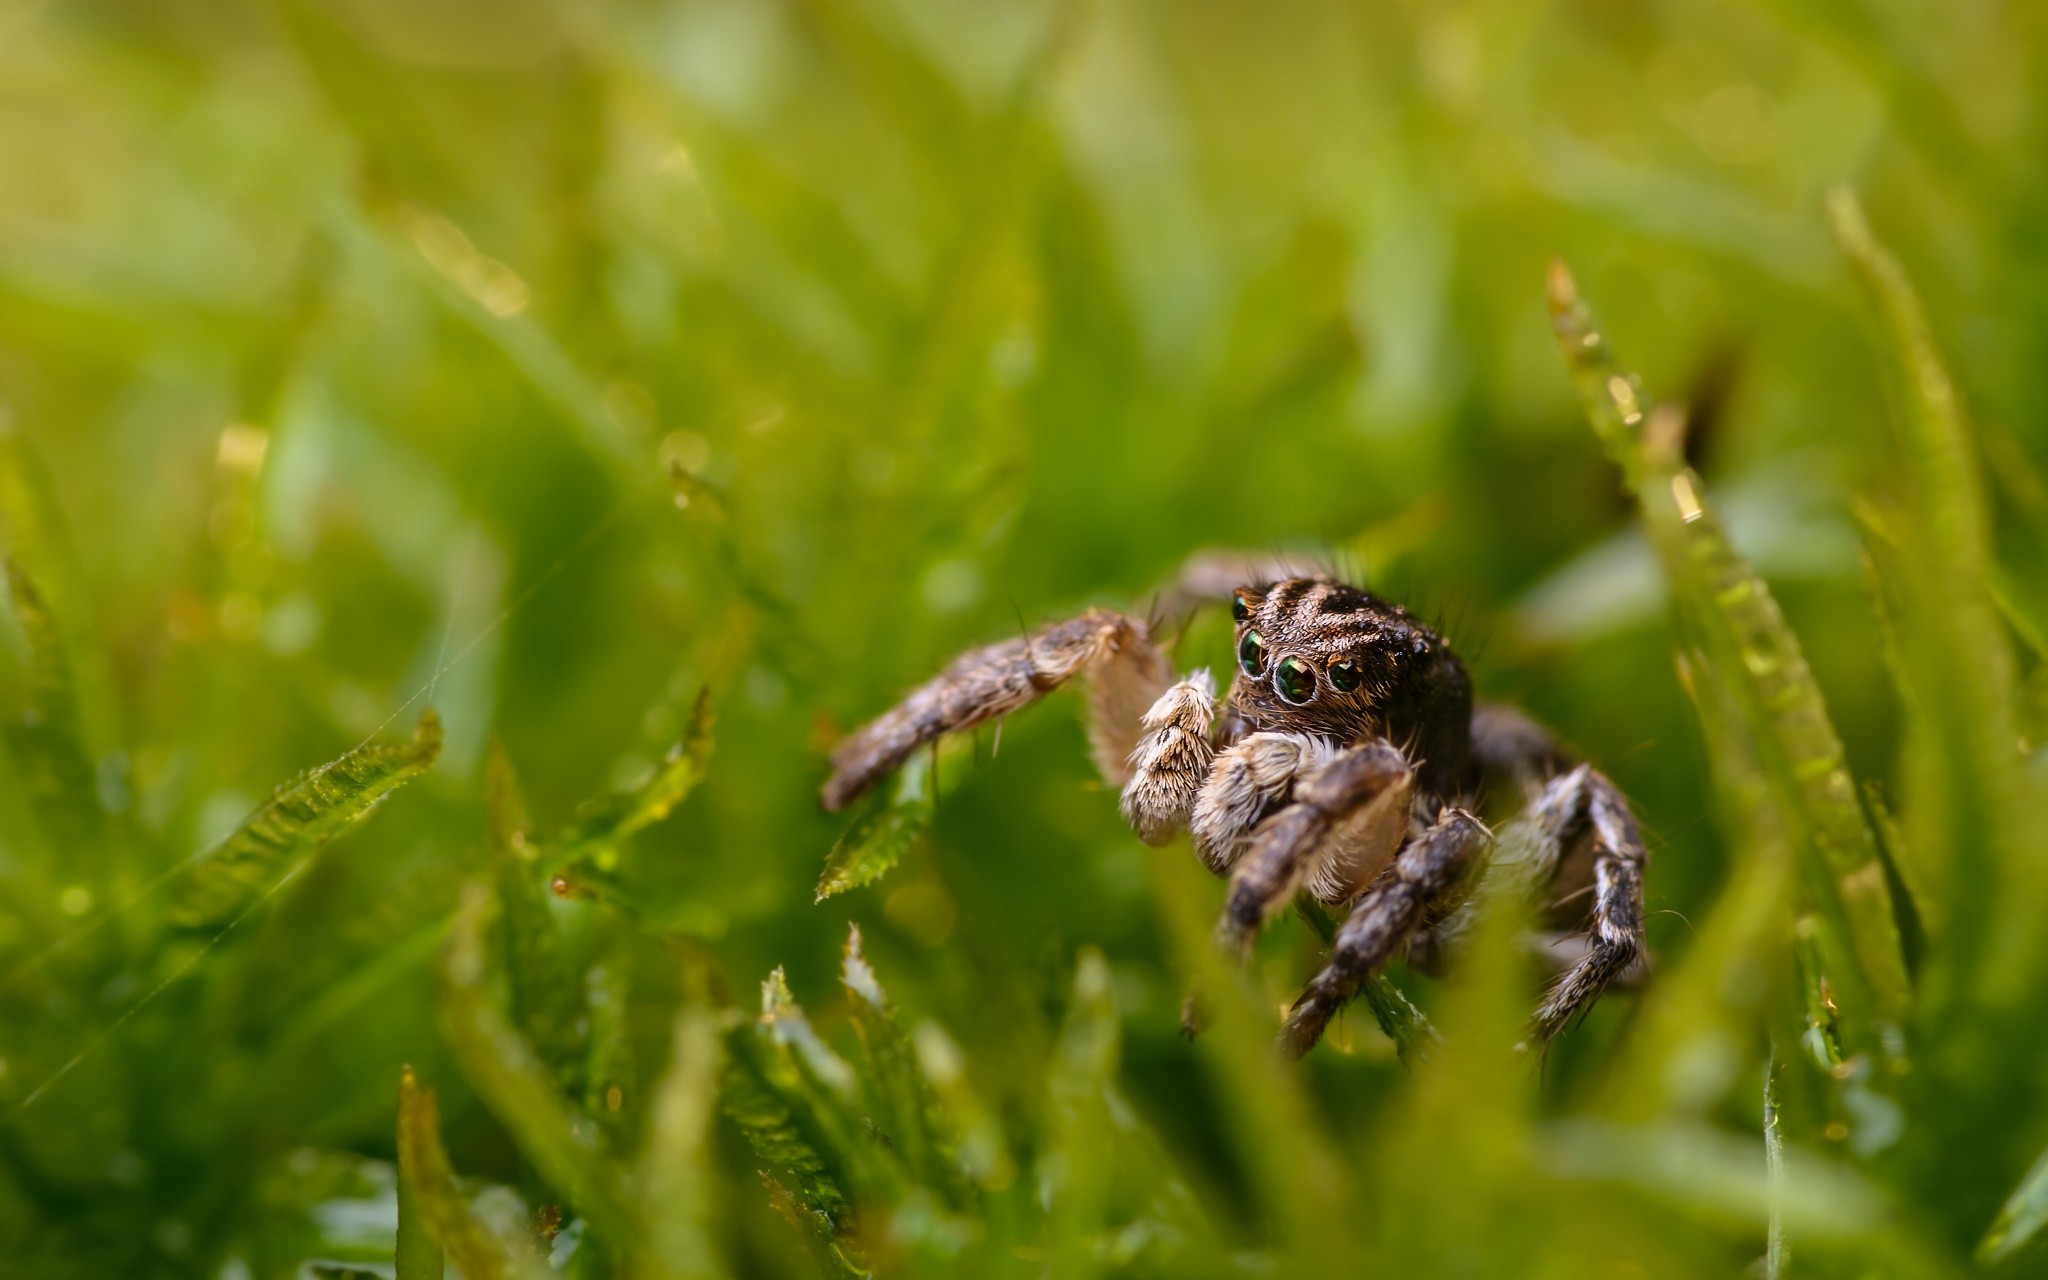 photography, Macro, Depth of field, Insect, Grass, Jumping Spider, Nature Wallpaper